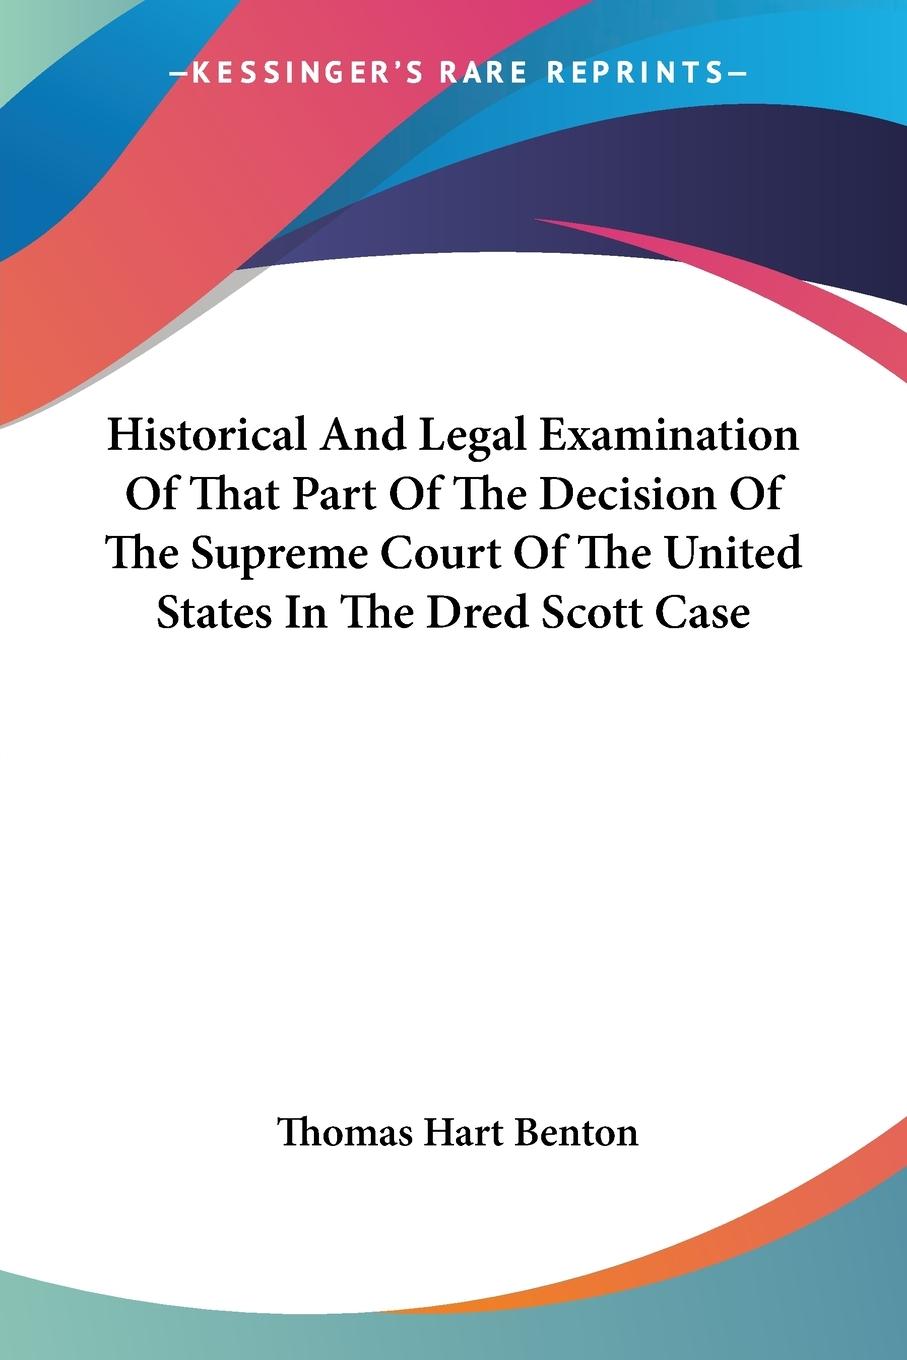 Historical And Legal Examination Of That Part Of The Decision Of The Supreme Court Of The United States In The Dred Scott Case - Benton, Thomas Hart